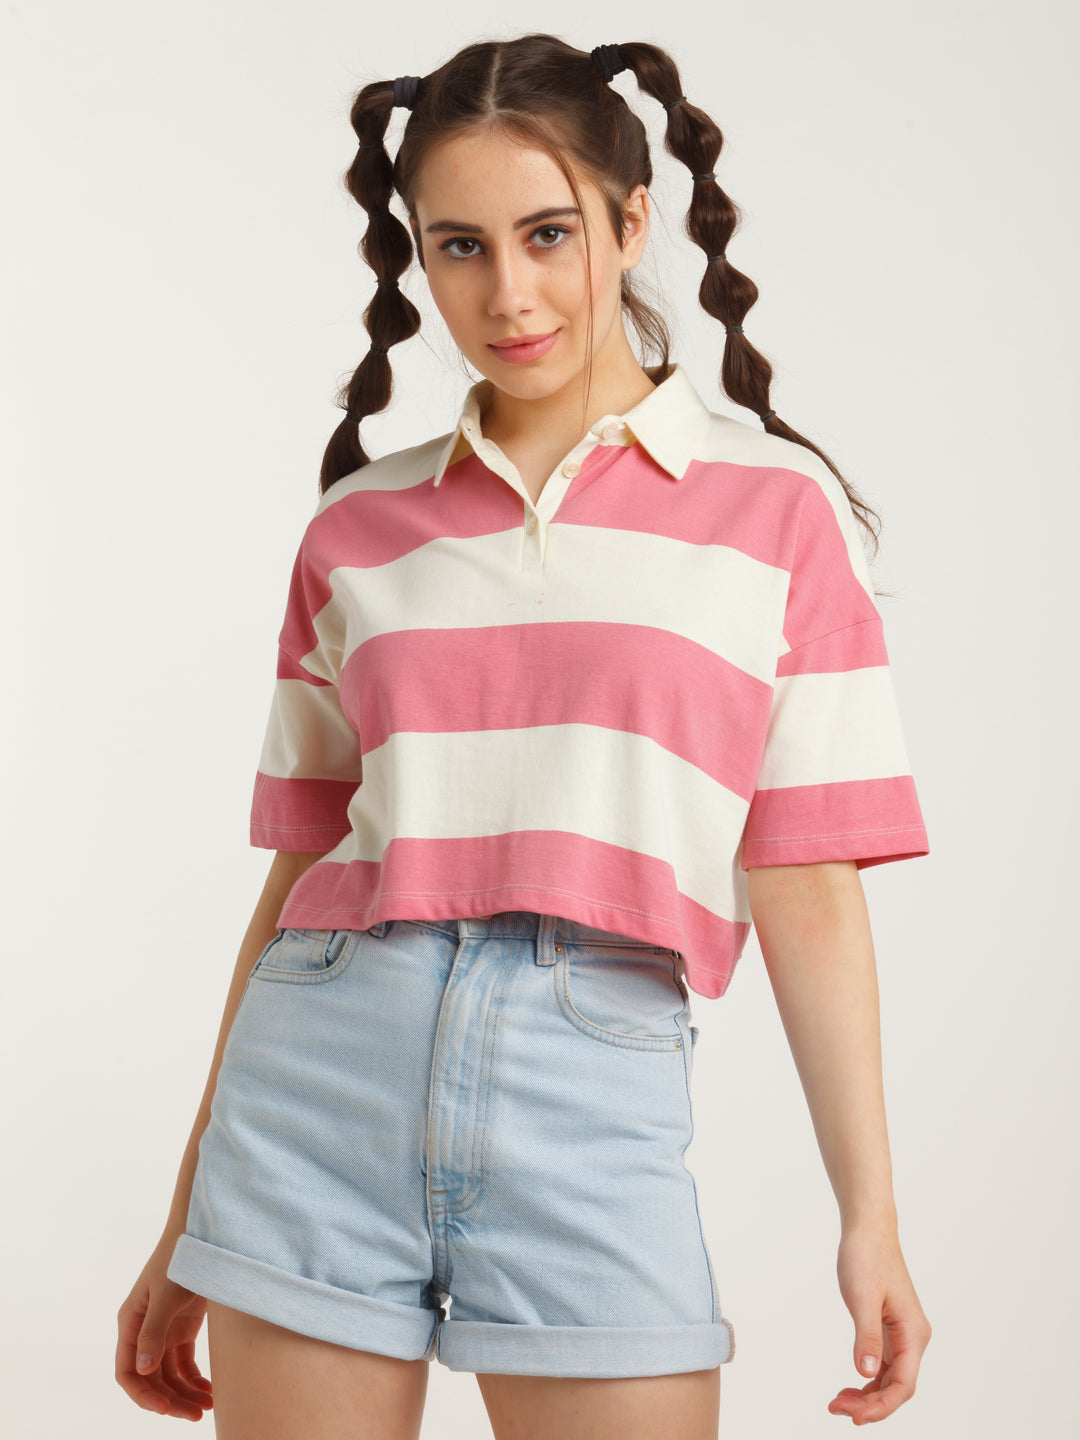 Off-White & Pink Striped Cropped T-Shirt For Women